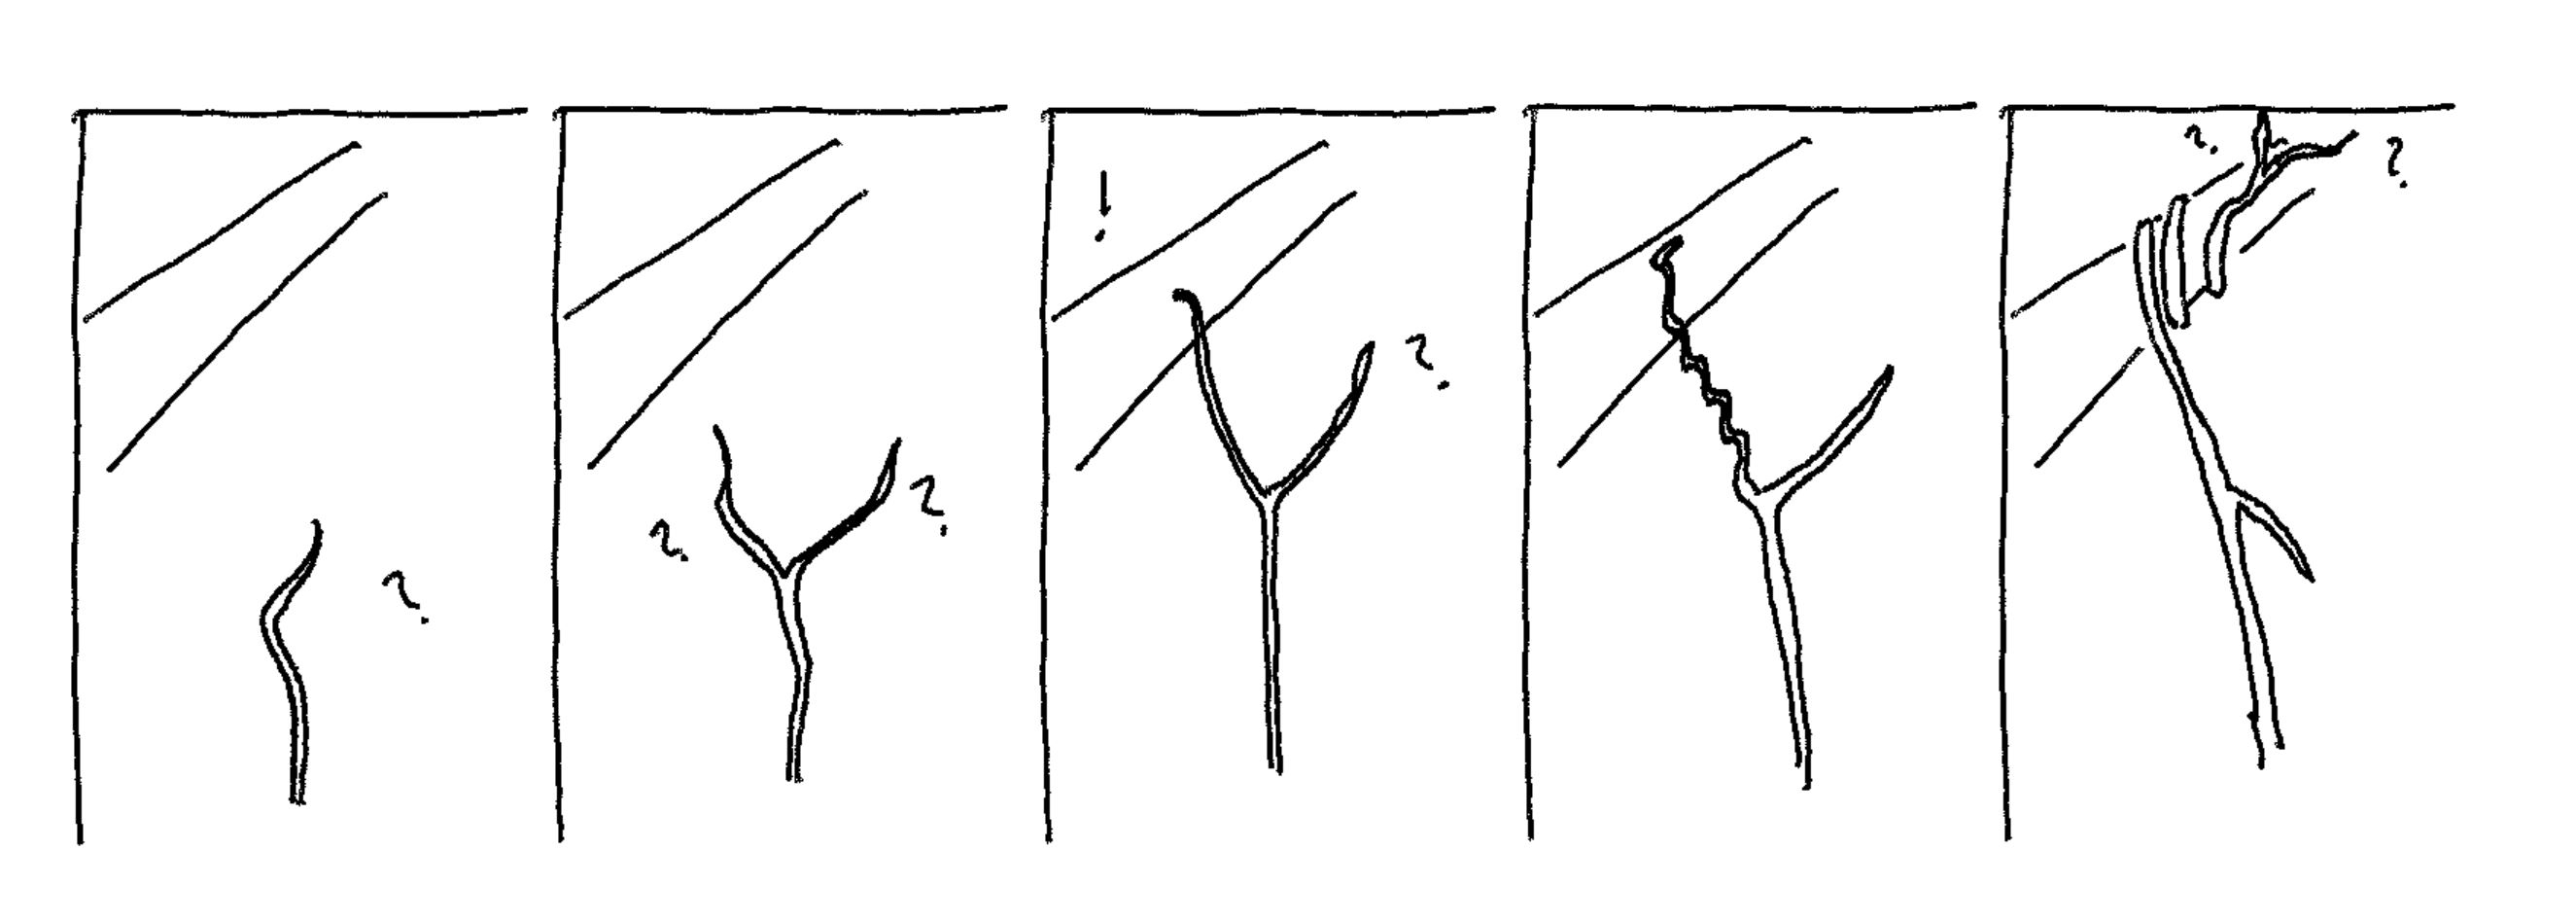 A climbing plant sends out questing flailing tendrils, then finds a branch, executes coiling and growth, and sends out new tendrils